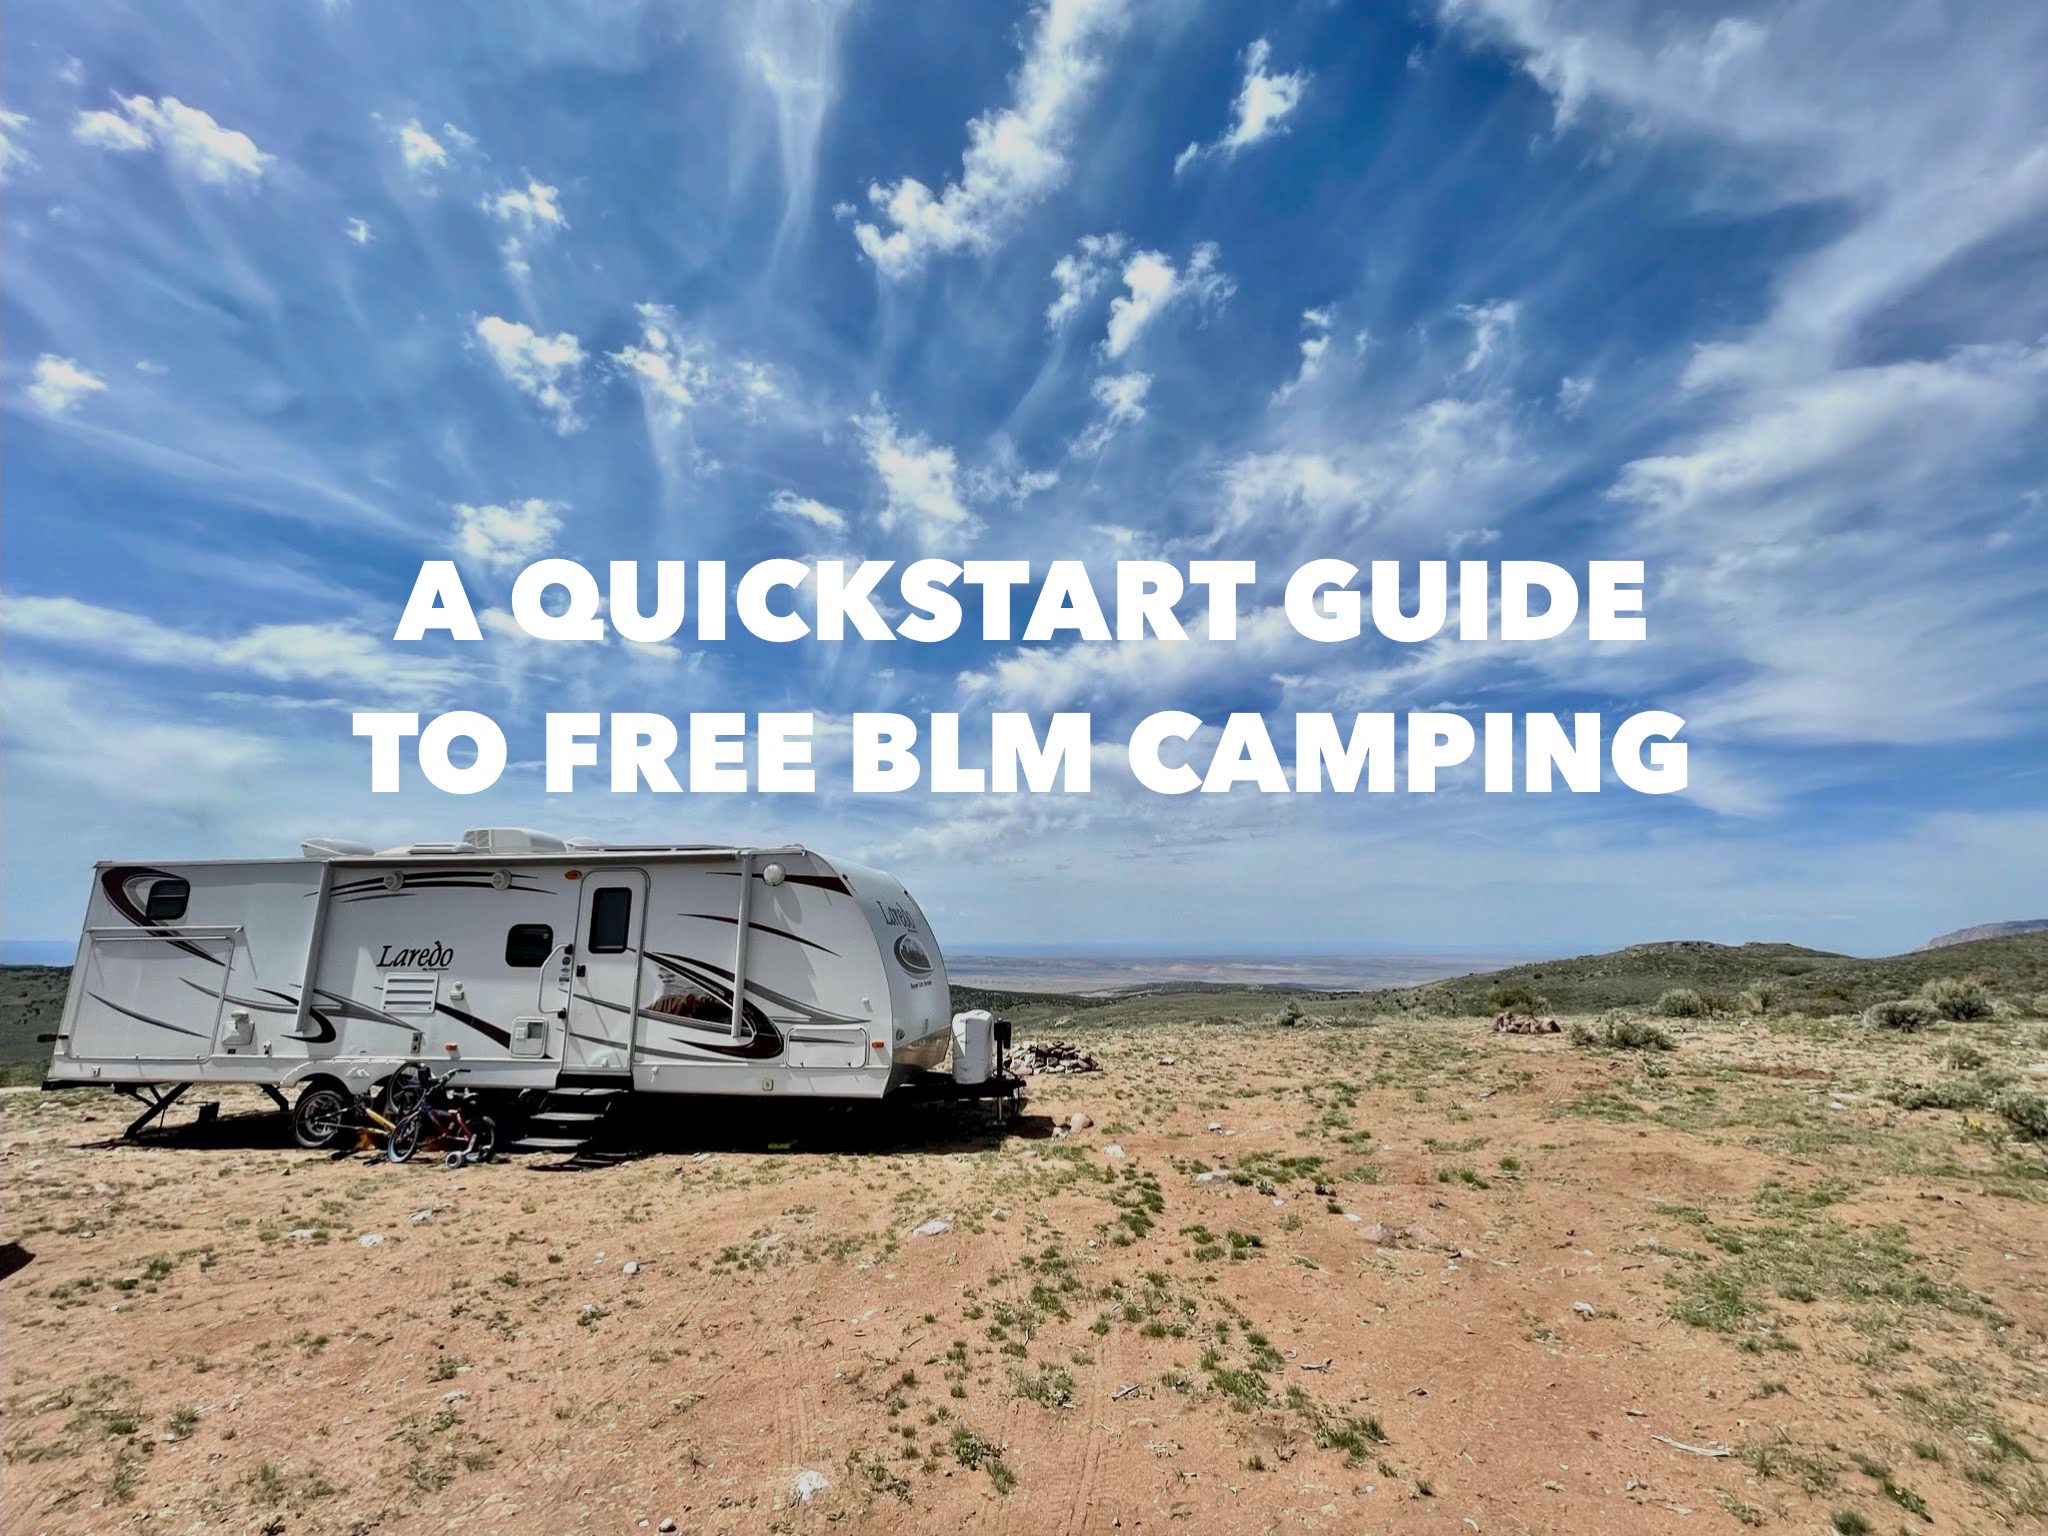 A quickstart guide to free BLM camping